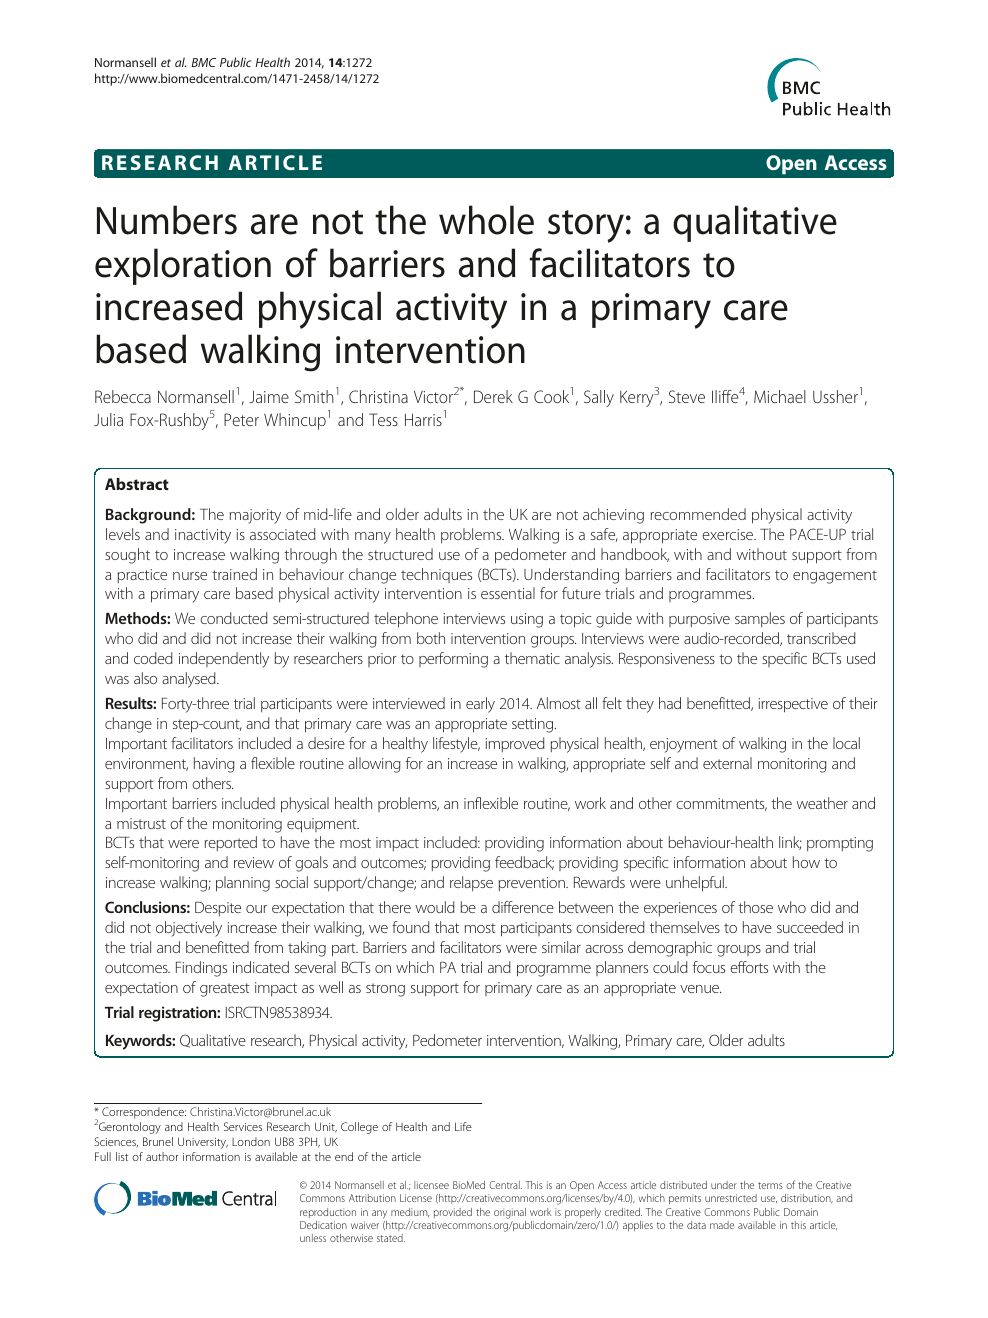 Numbers Are Not The Whole Story A Qualitative Exploration Of Barriers And Facilitators To Increased Physical Activity In A Primary Care Based Walking Intervention Topic Of Research Paper In Clinical Medicine